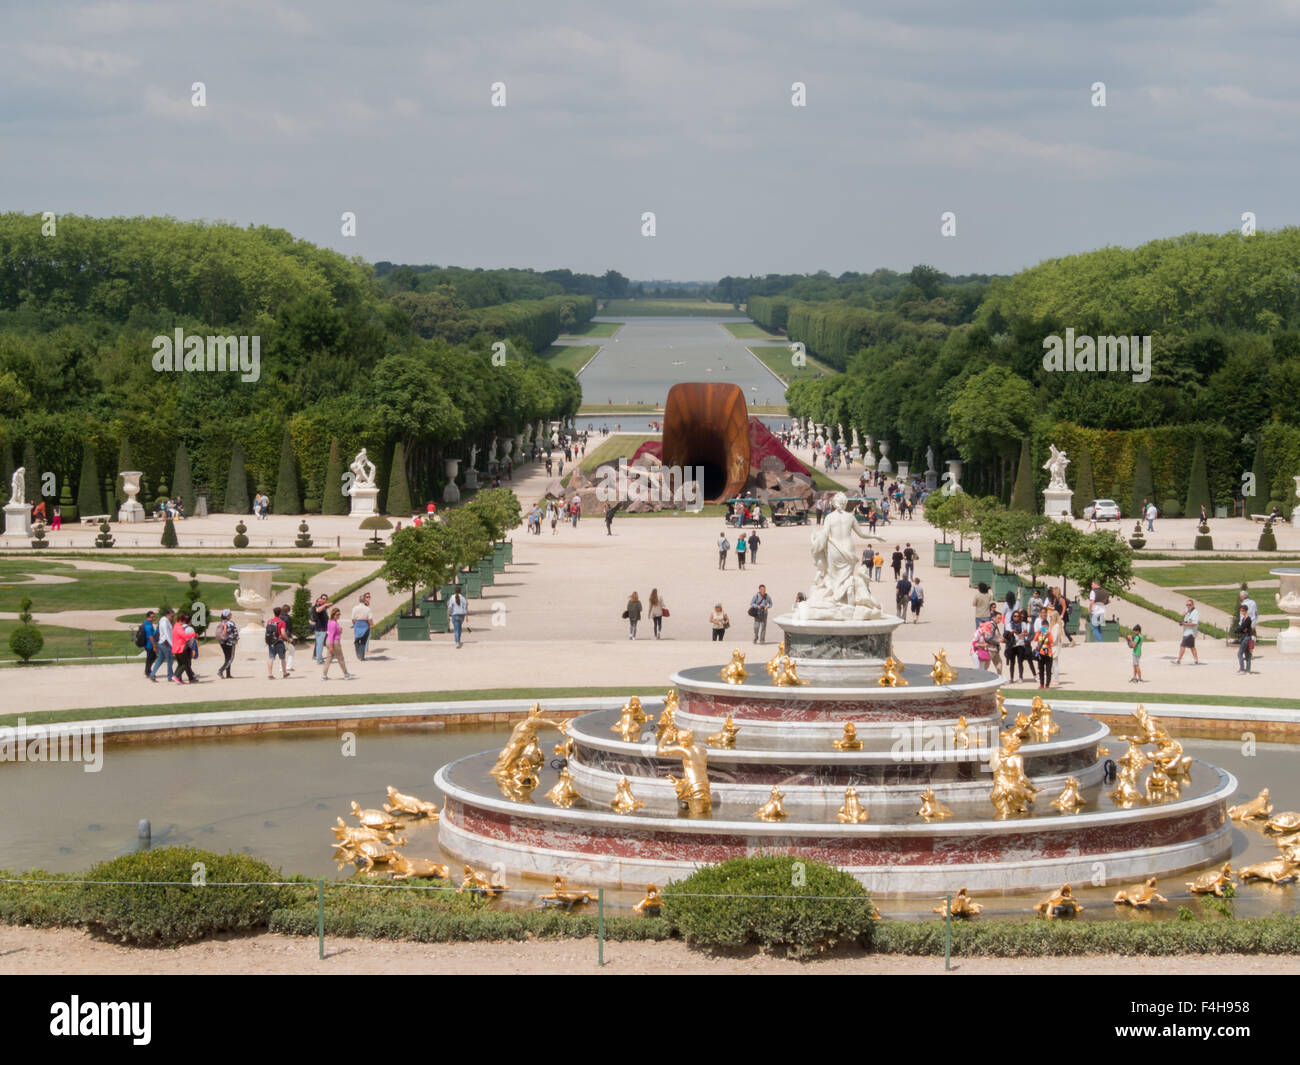 Versailles garden general view with Anish Kapoor Dirty Corner installation at the center Stock Photo